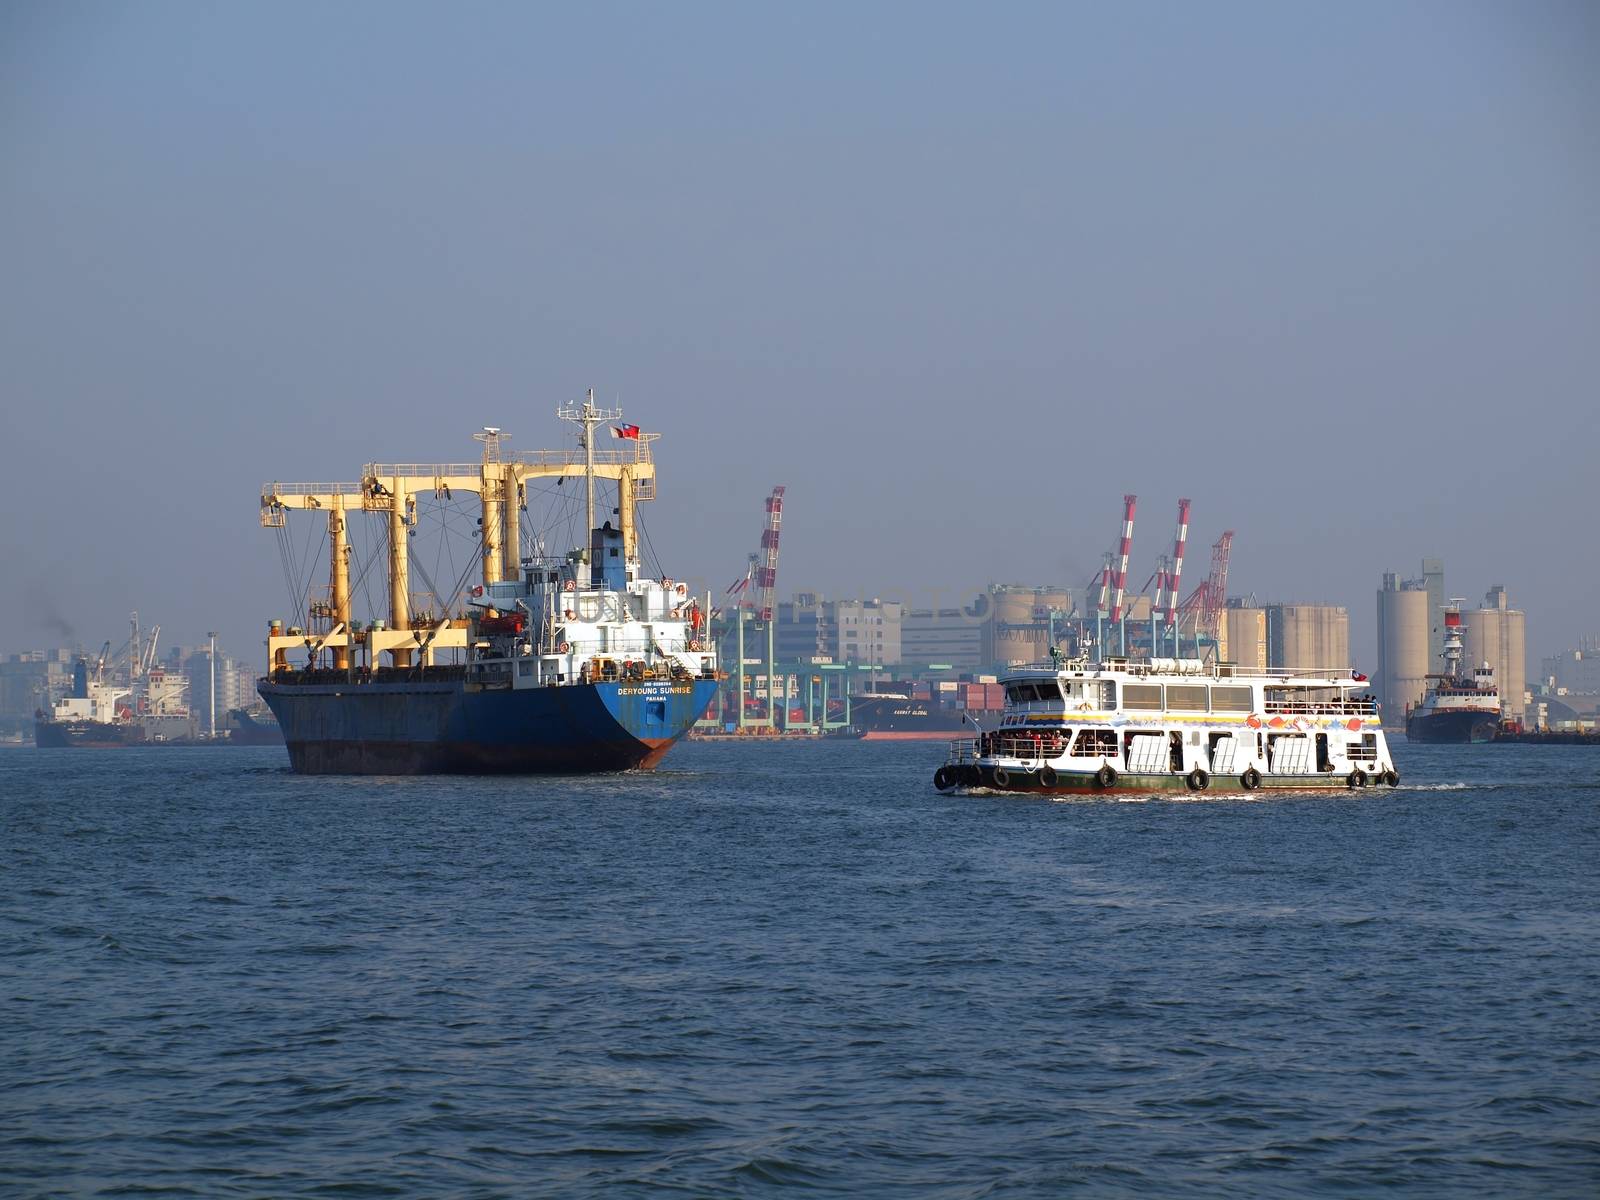 Heavy Air Pollution in Kaohsiung Harbor by shiyali